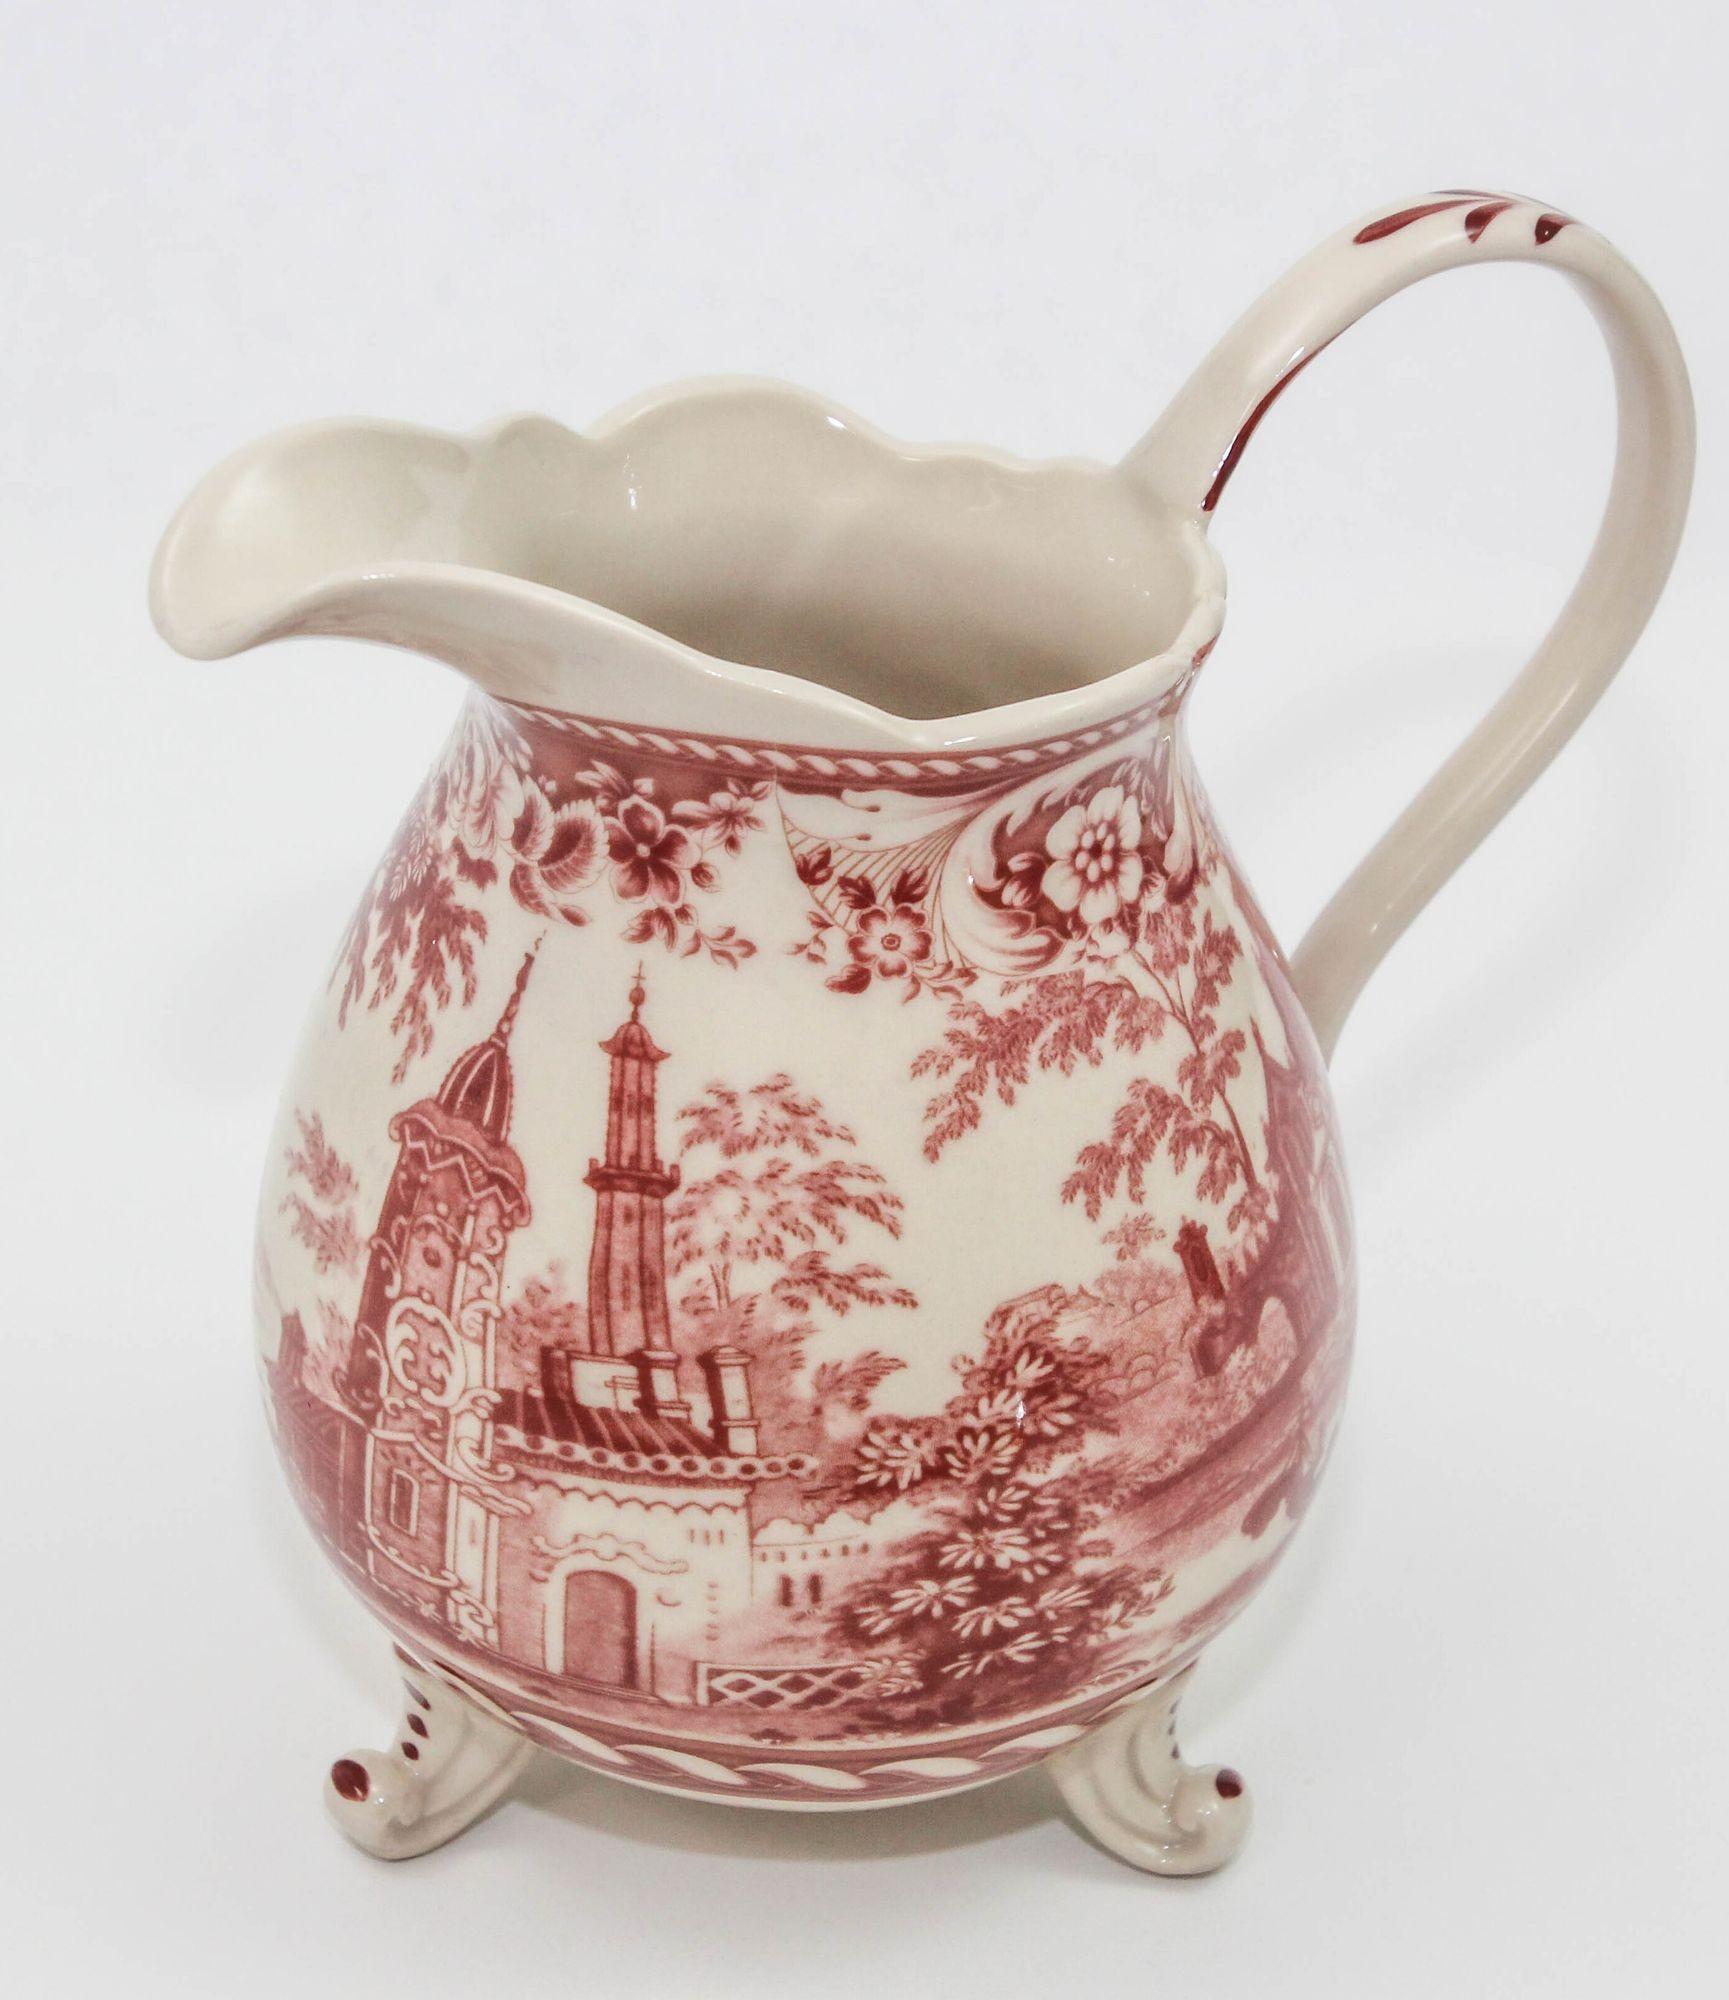 Vintage white and cranberry transferware porcelain footed pitcher
This is one of my favorite colors in ceramic Transferware, is the cranberry red Transferware.
This is a very nicely detailed pitcher with the pattern covering most of the surface and